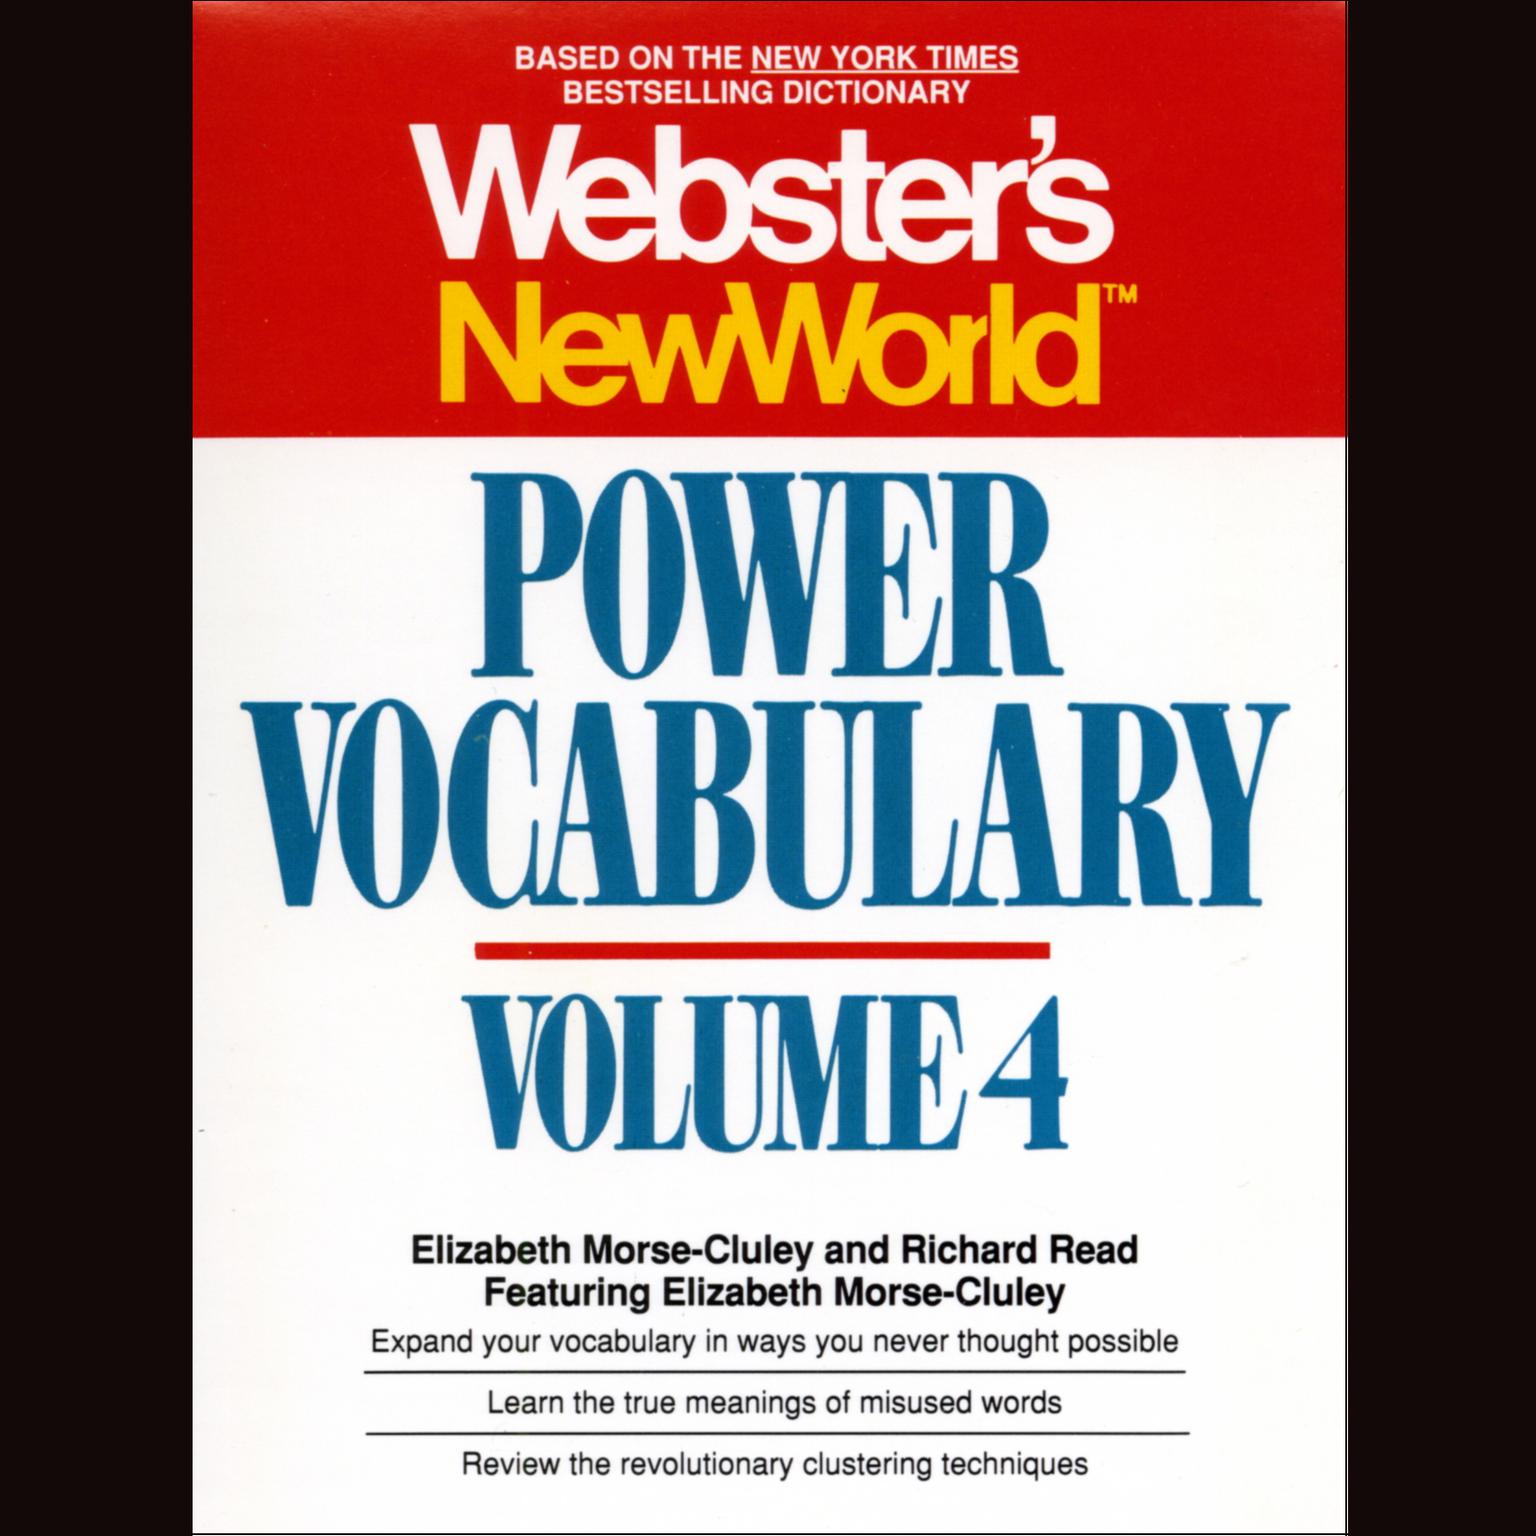 Webster’s New World Power Vocabulary, Vol. 4 (Abridged) Audiobook, by Elizabeth Morse-Cluley